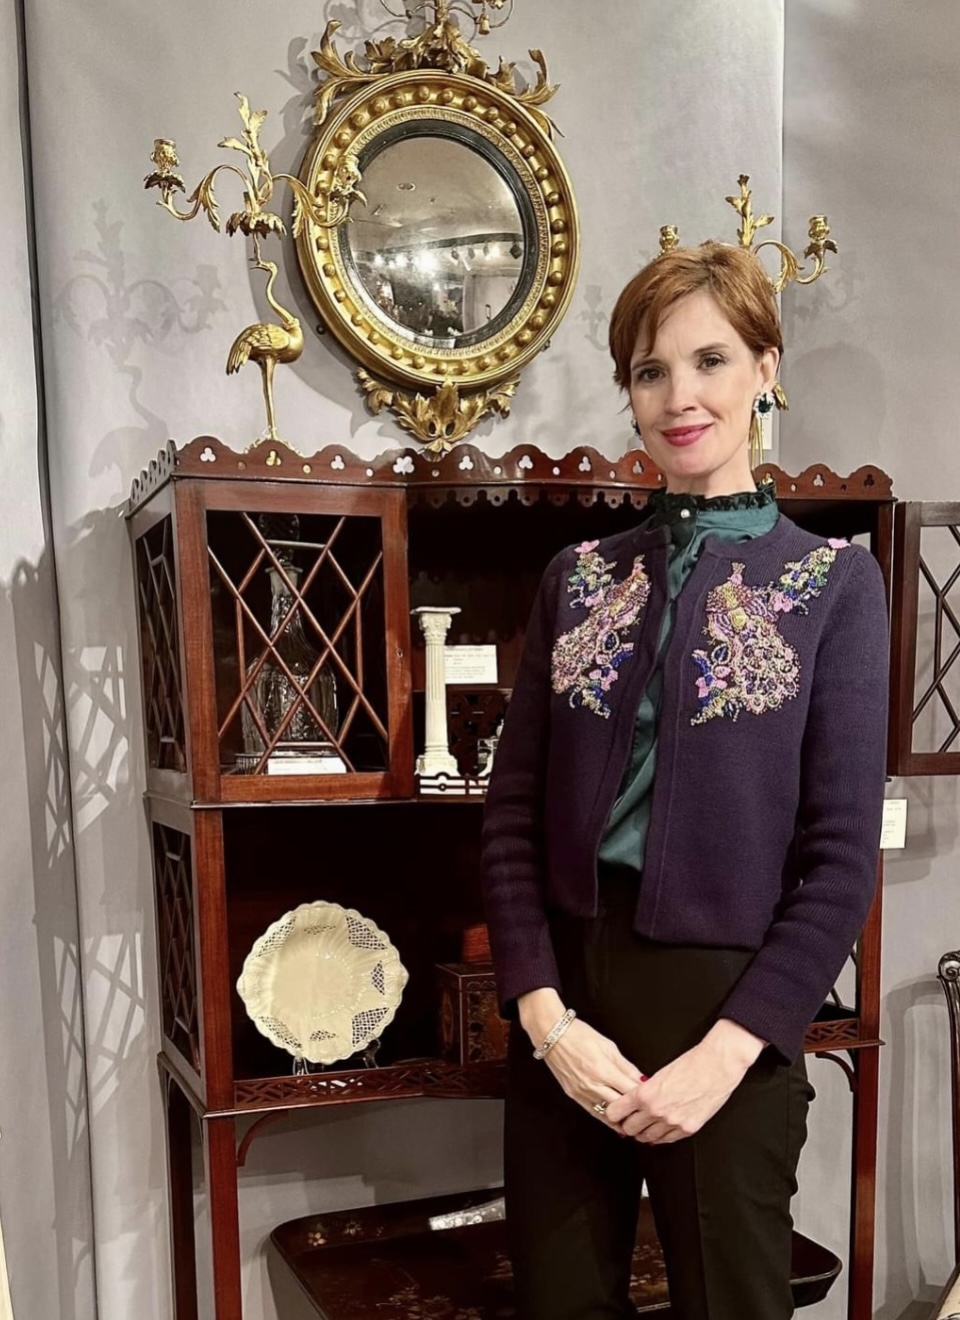 Well dressed woman in front of an antique cabinet and mirror.